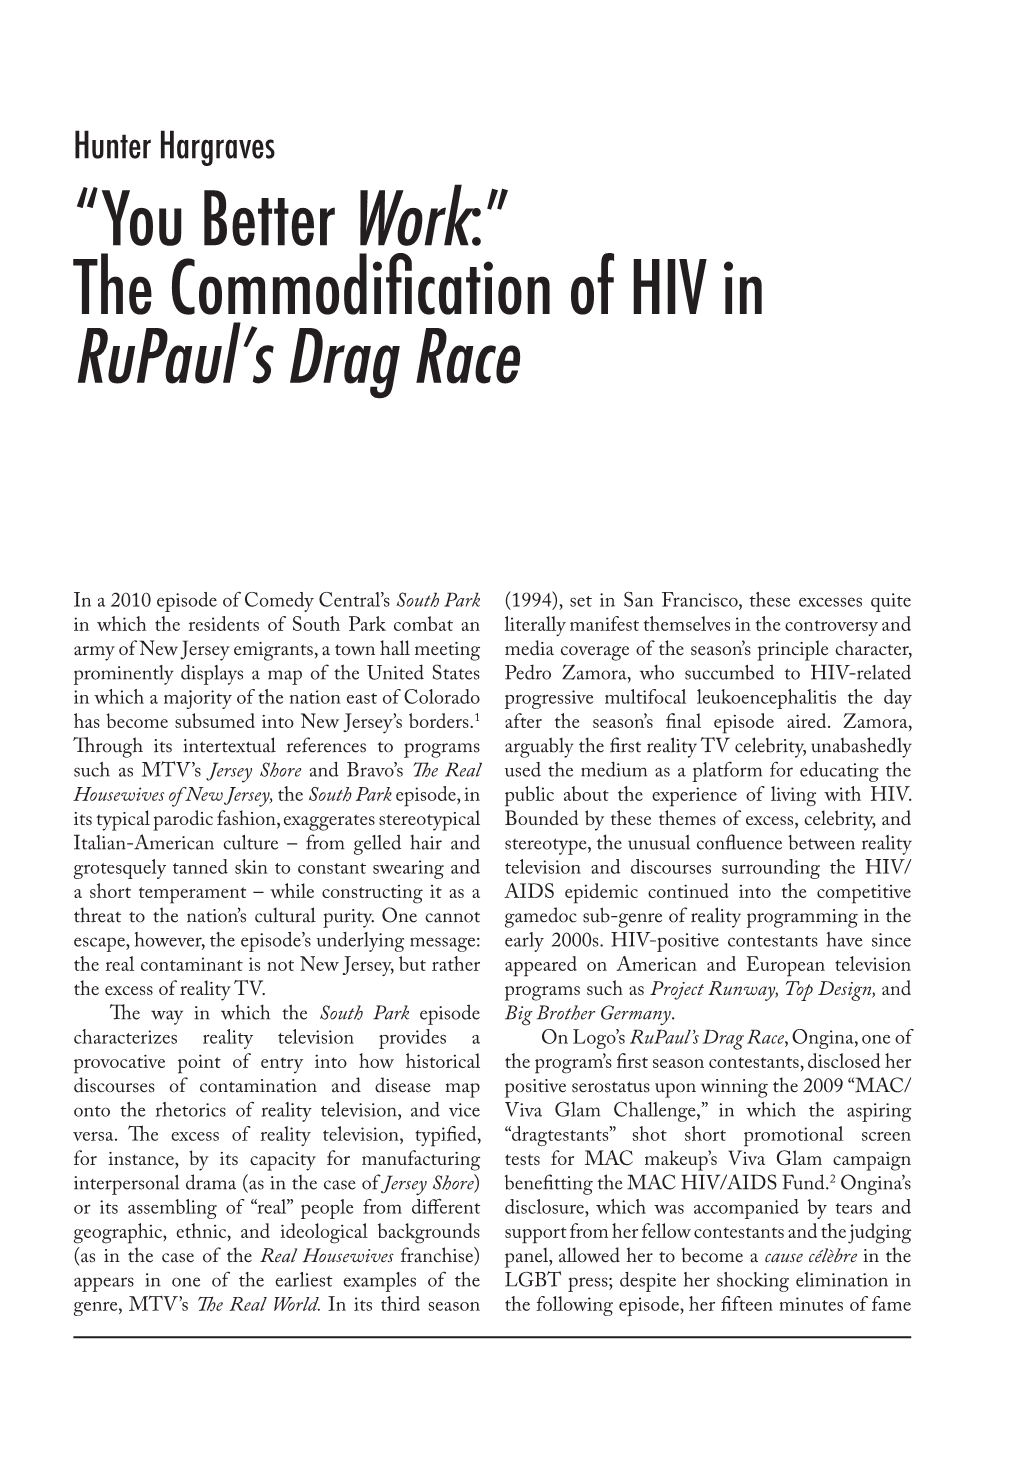 “You Better Work:” the Commodification of HIV in Rupaul's